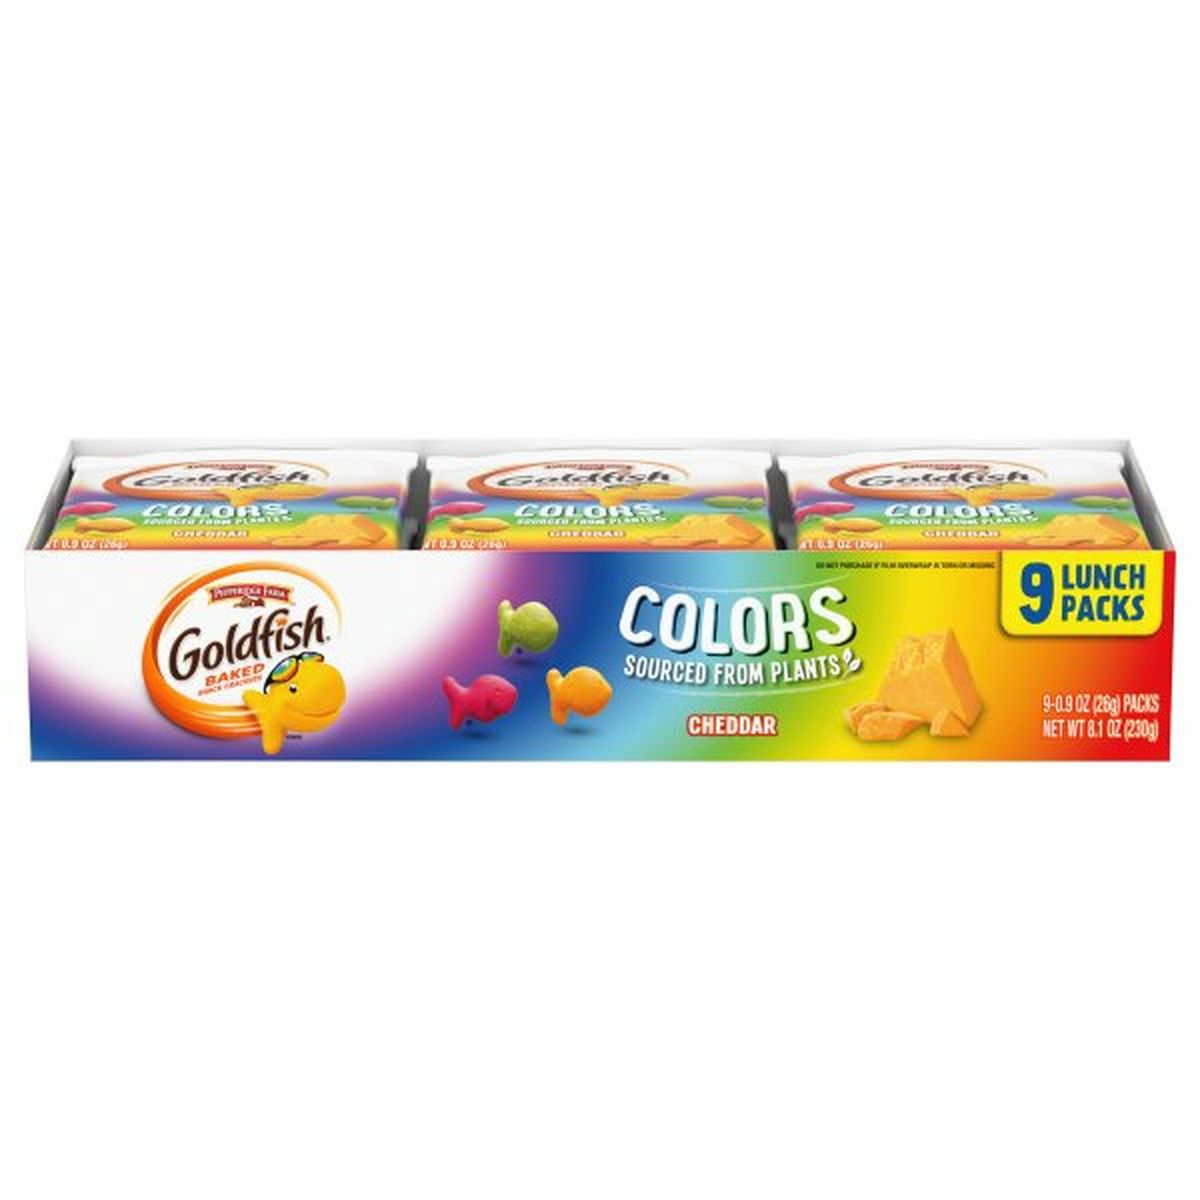 Calories in Pepperidge Farms  Goldfishs Baked Snack Crackers, Colors, Cheddar, 9 Lunch Packs